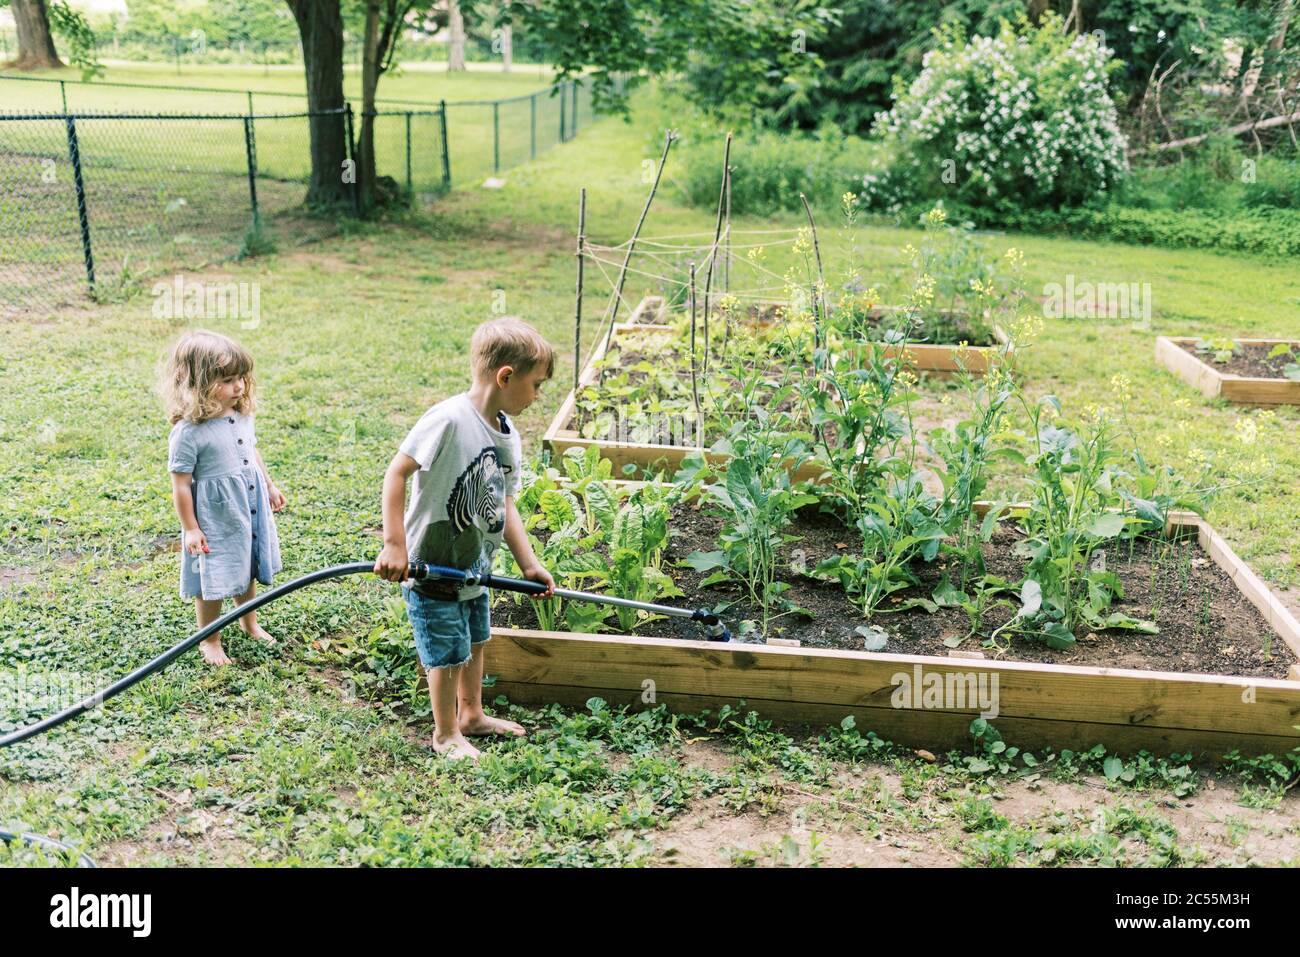 A little girl watching her big brother watering the vegetables Stock Photo